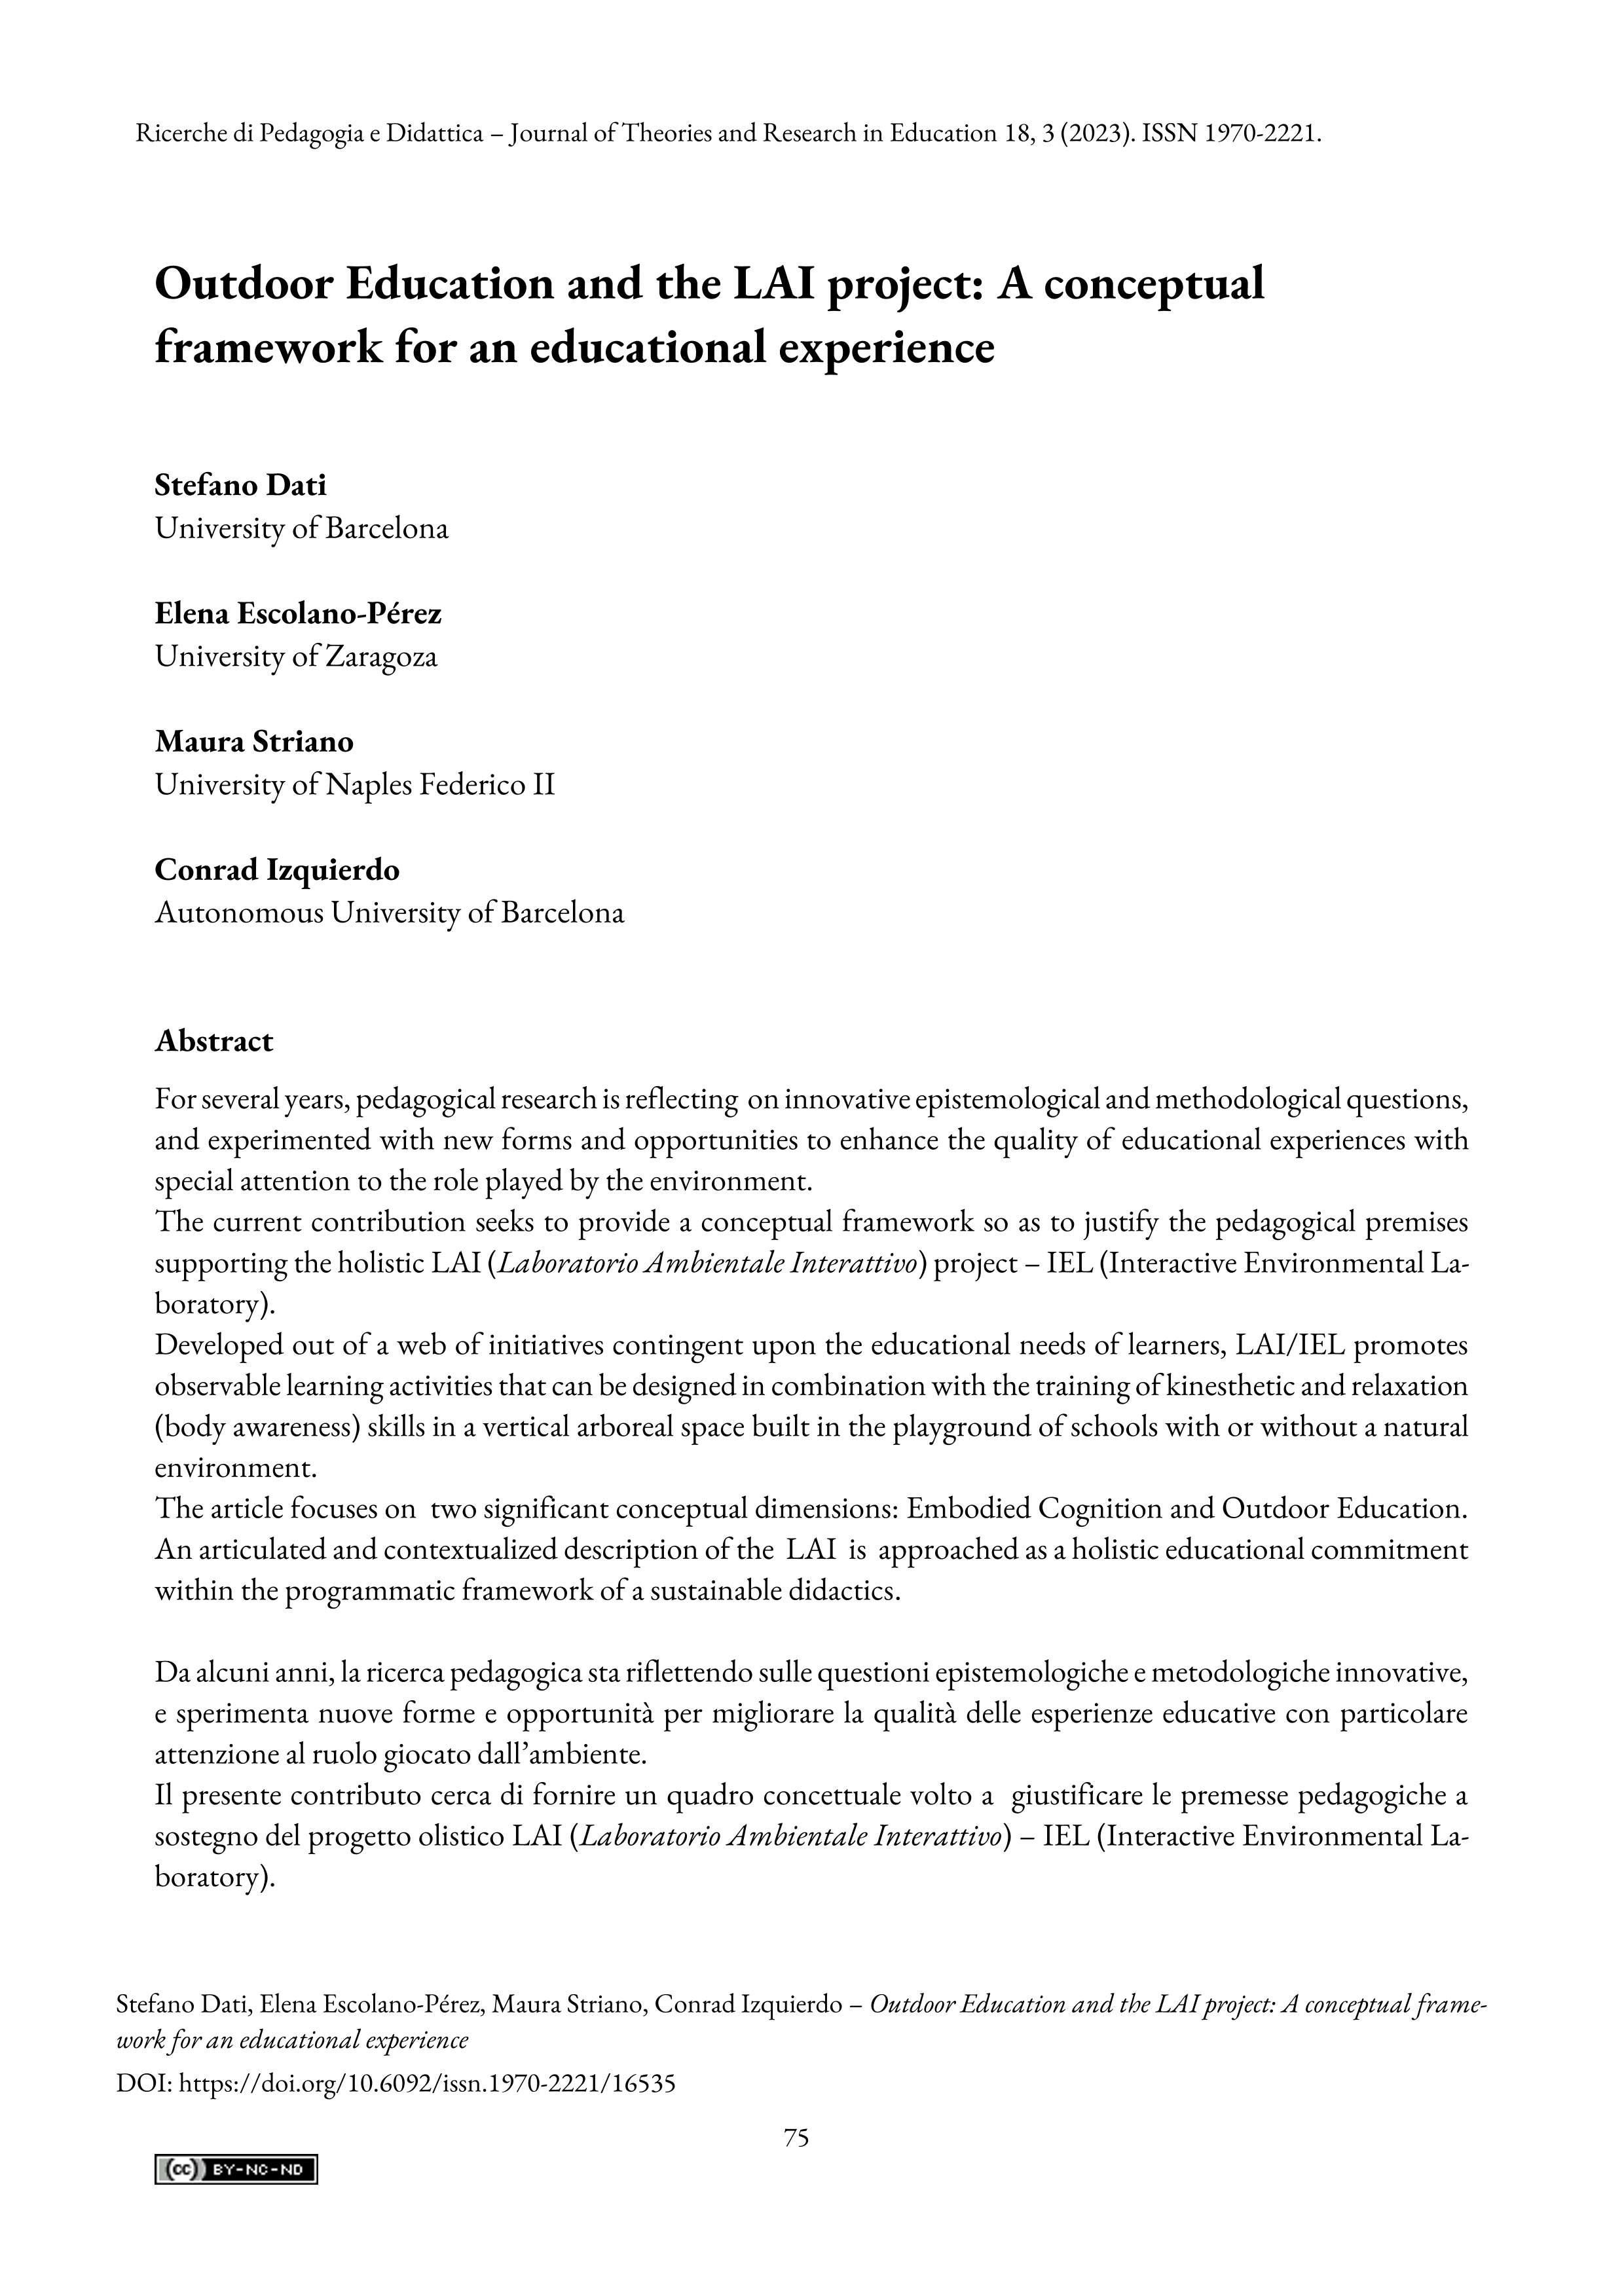 Outdoor Education and the LAI project: A conceptual framework for an educational experience